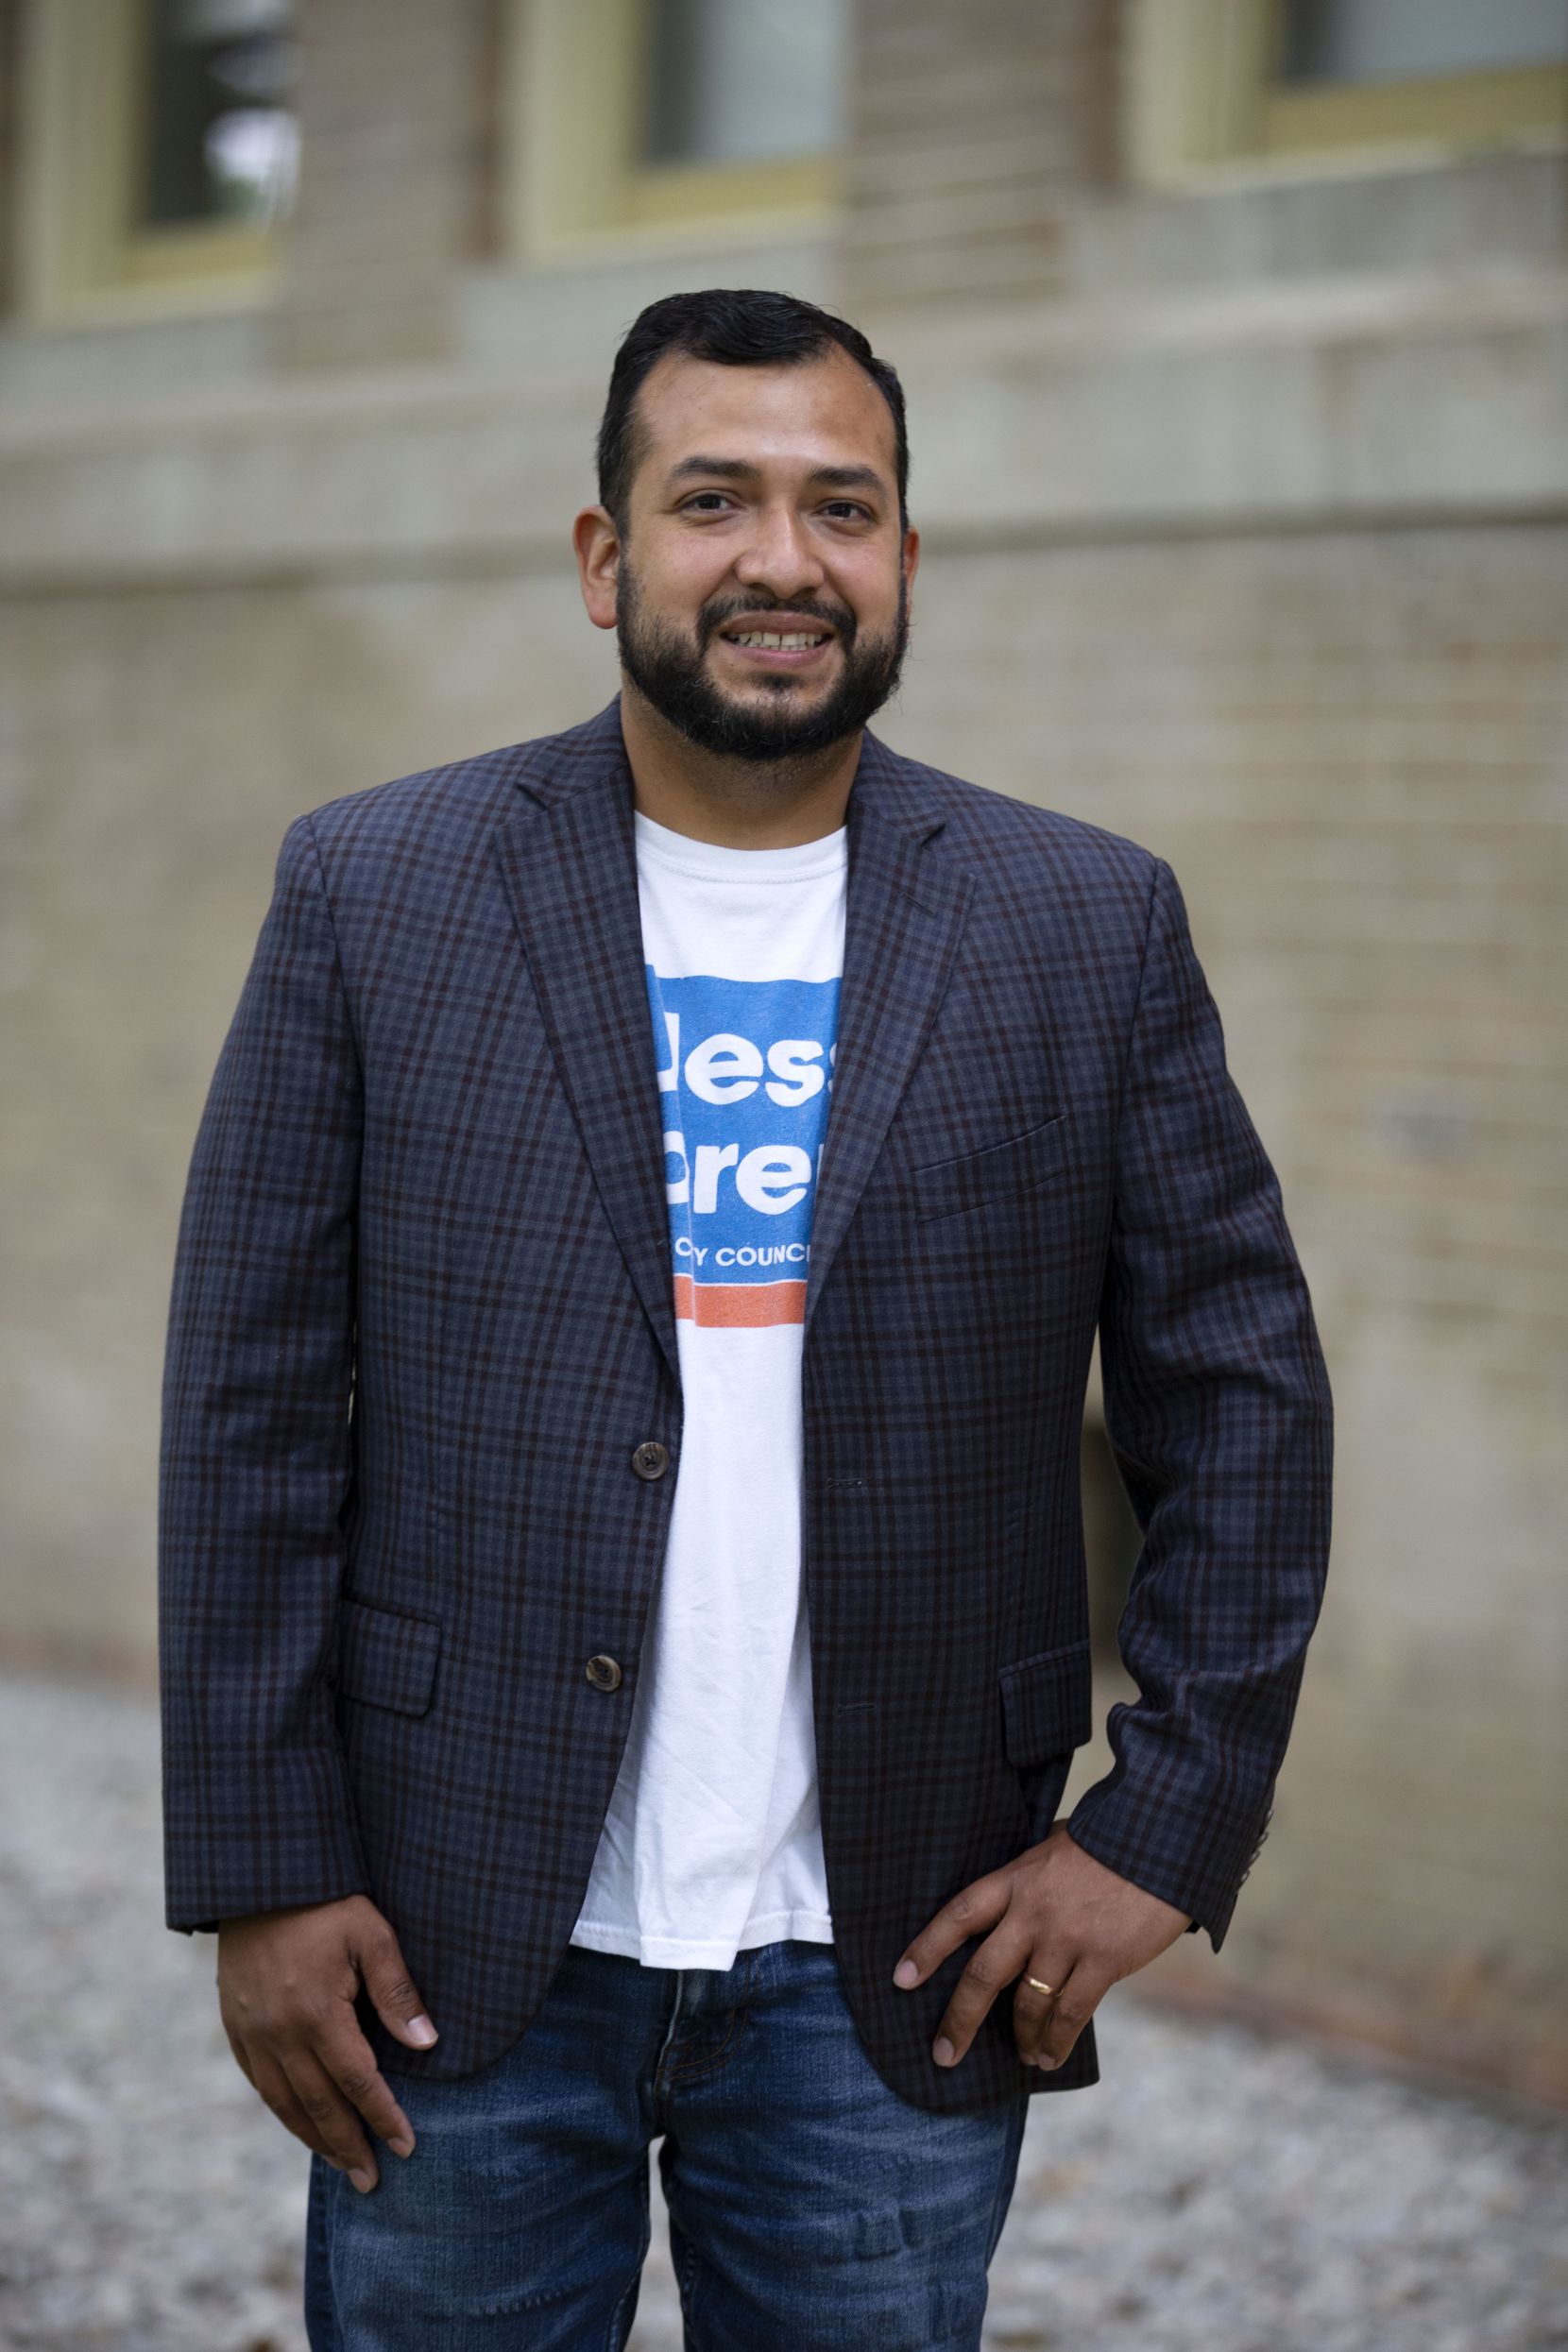 Jesse Moreno, a Dallas City Council candidate, is running to represent District 2, shown on Saturday, May 22, 2021. (Allison Slomowitz/ Special Contributor)